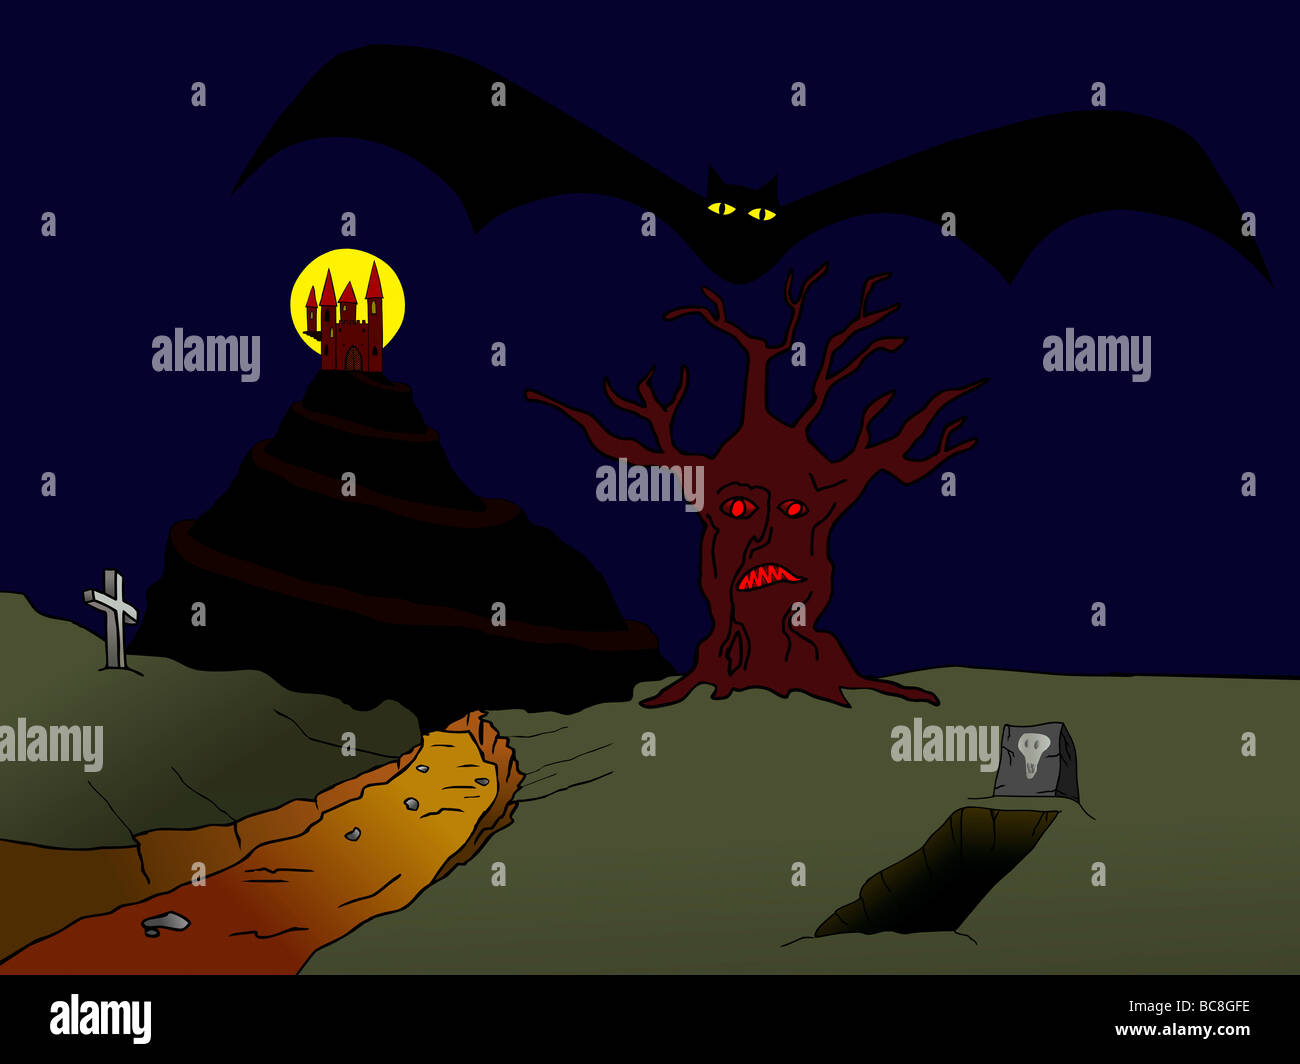 Illustration of the old haunted castle on the hill and flying vampire bat Stock Photo